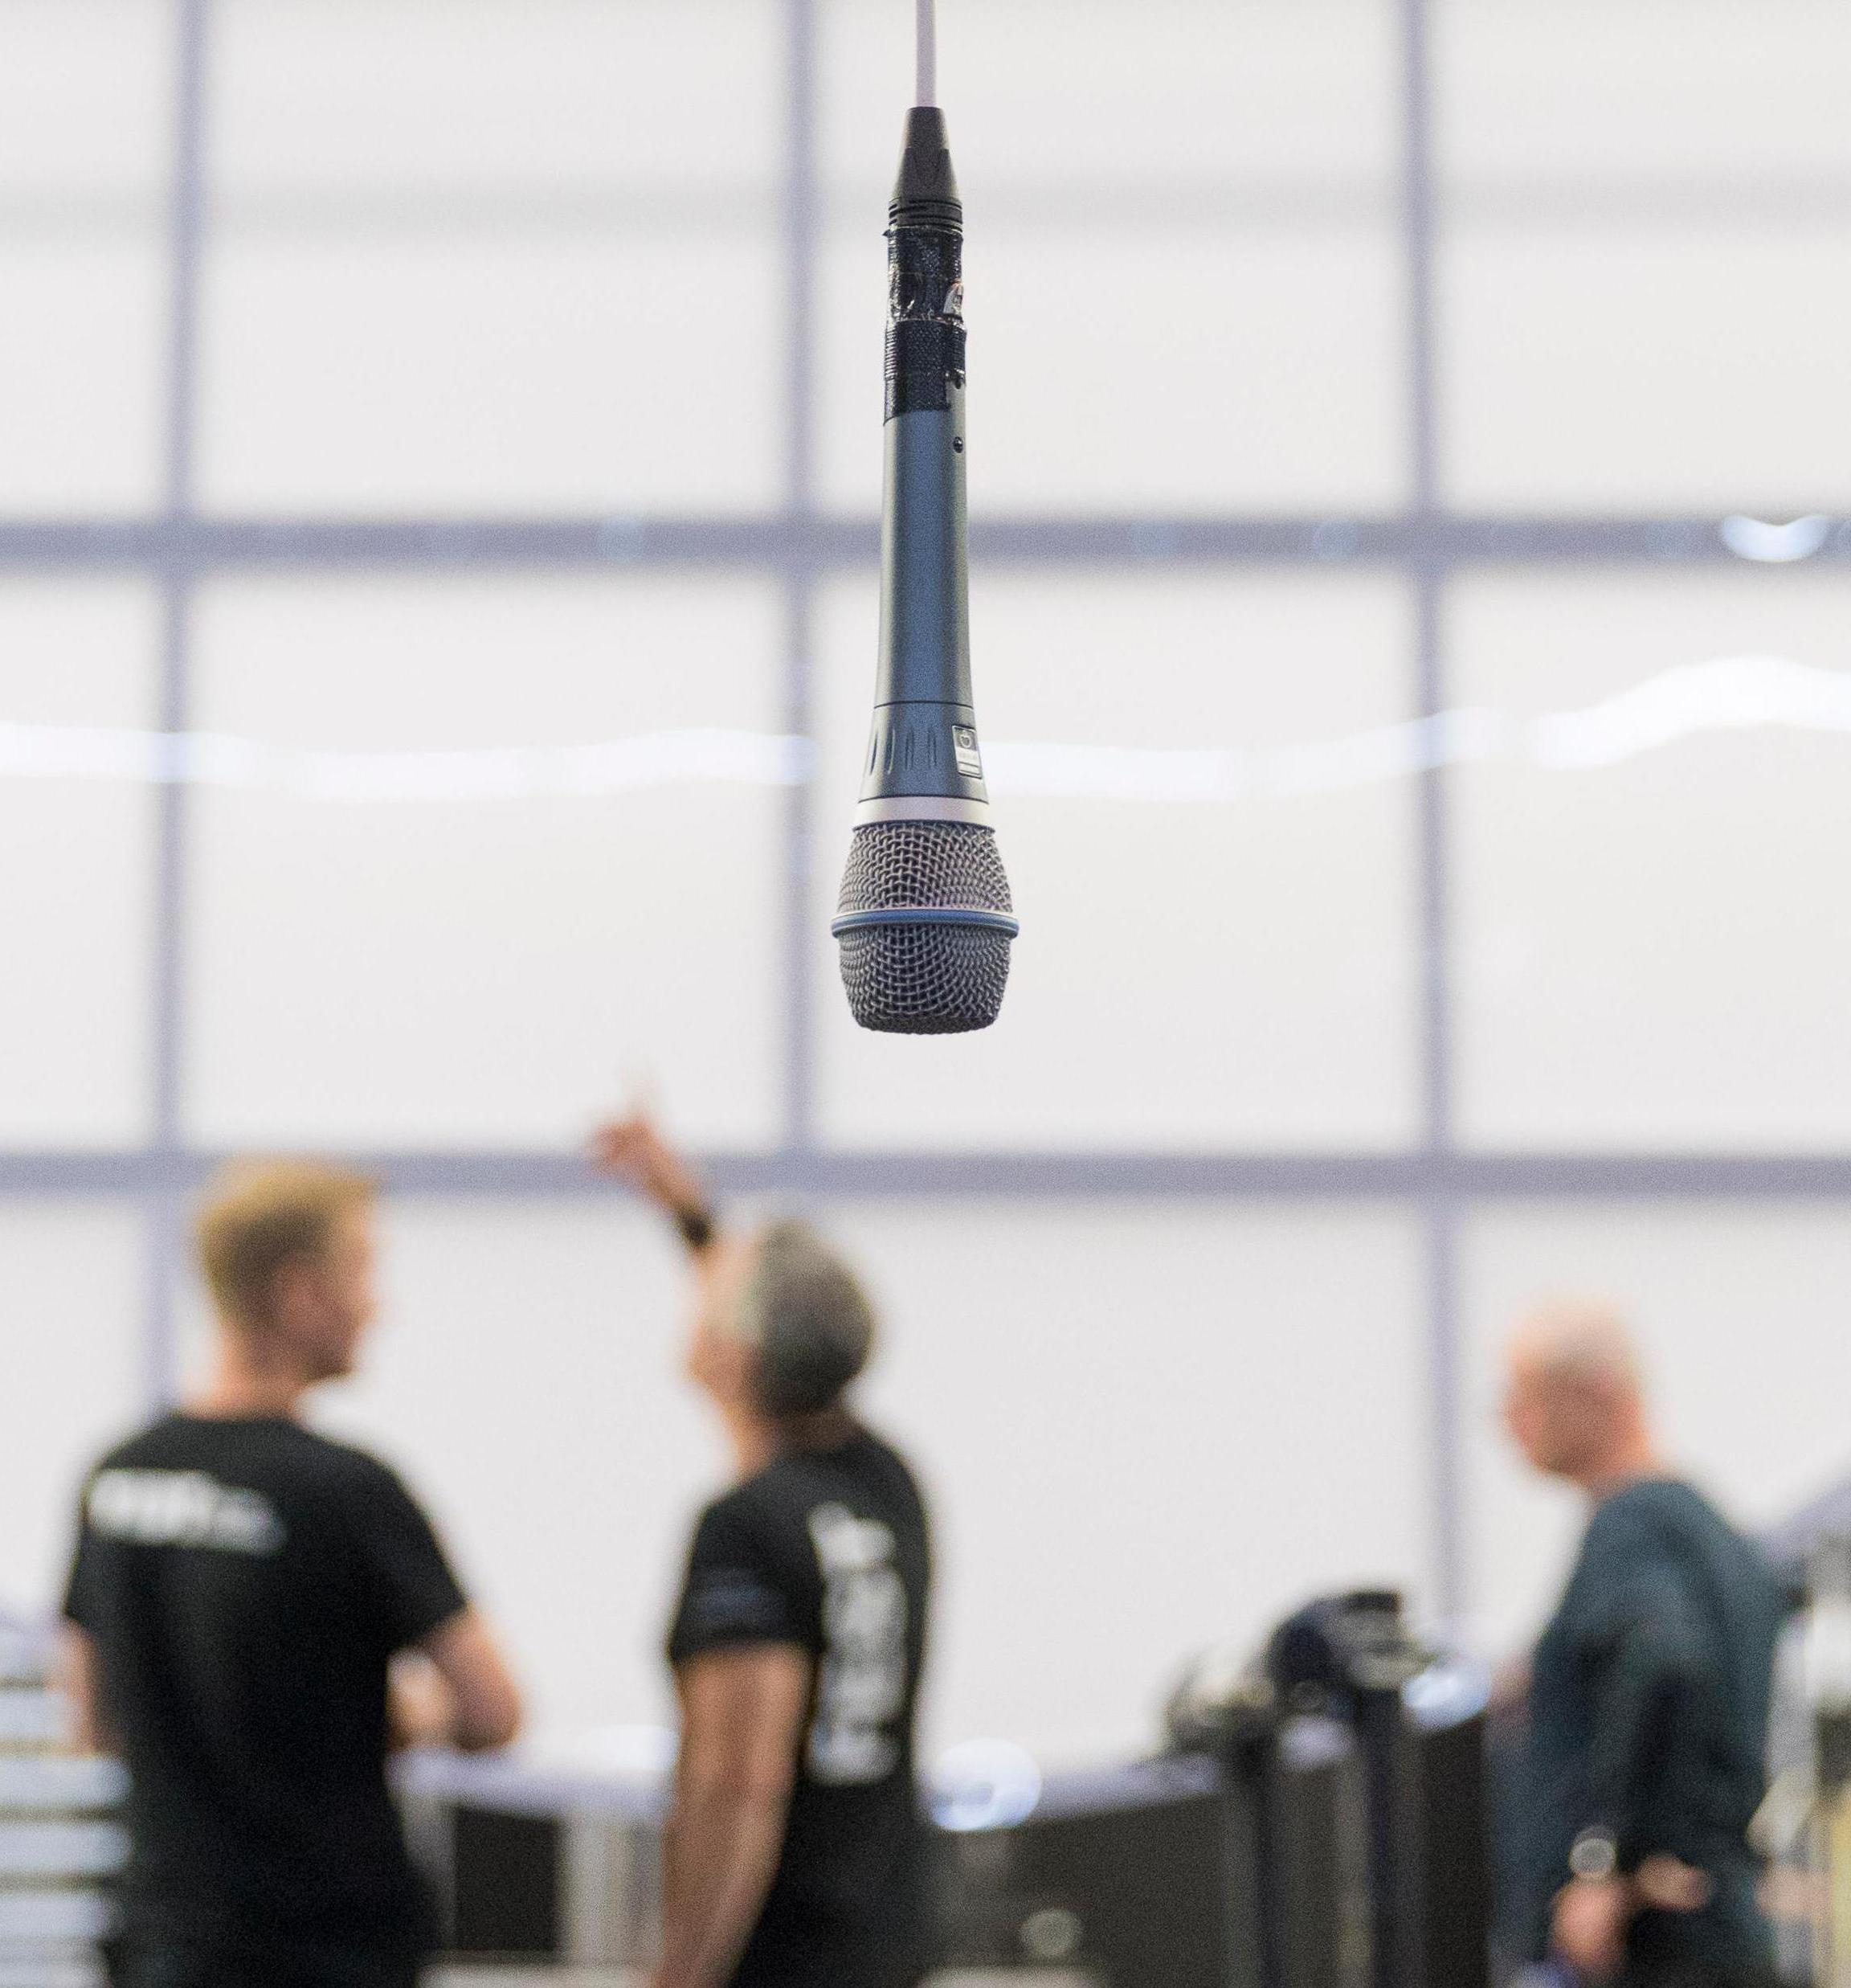 A microphone hanging down can be seen in the foreground. Several technicians are blurred in the background.